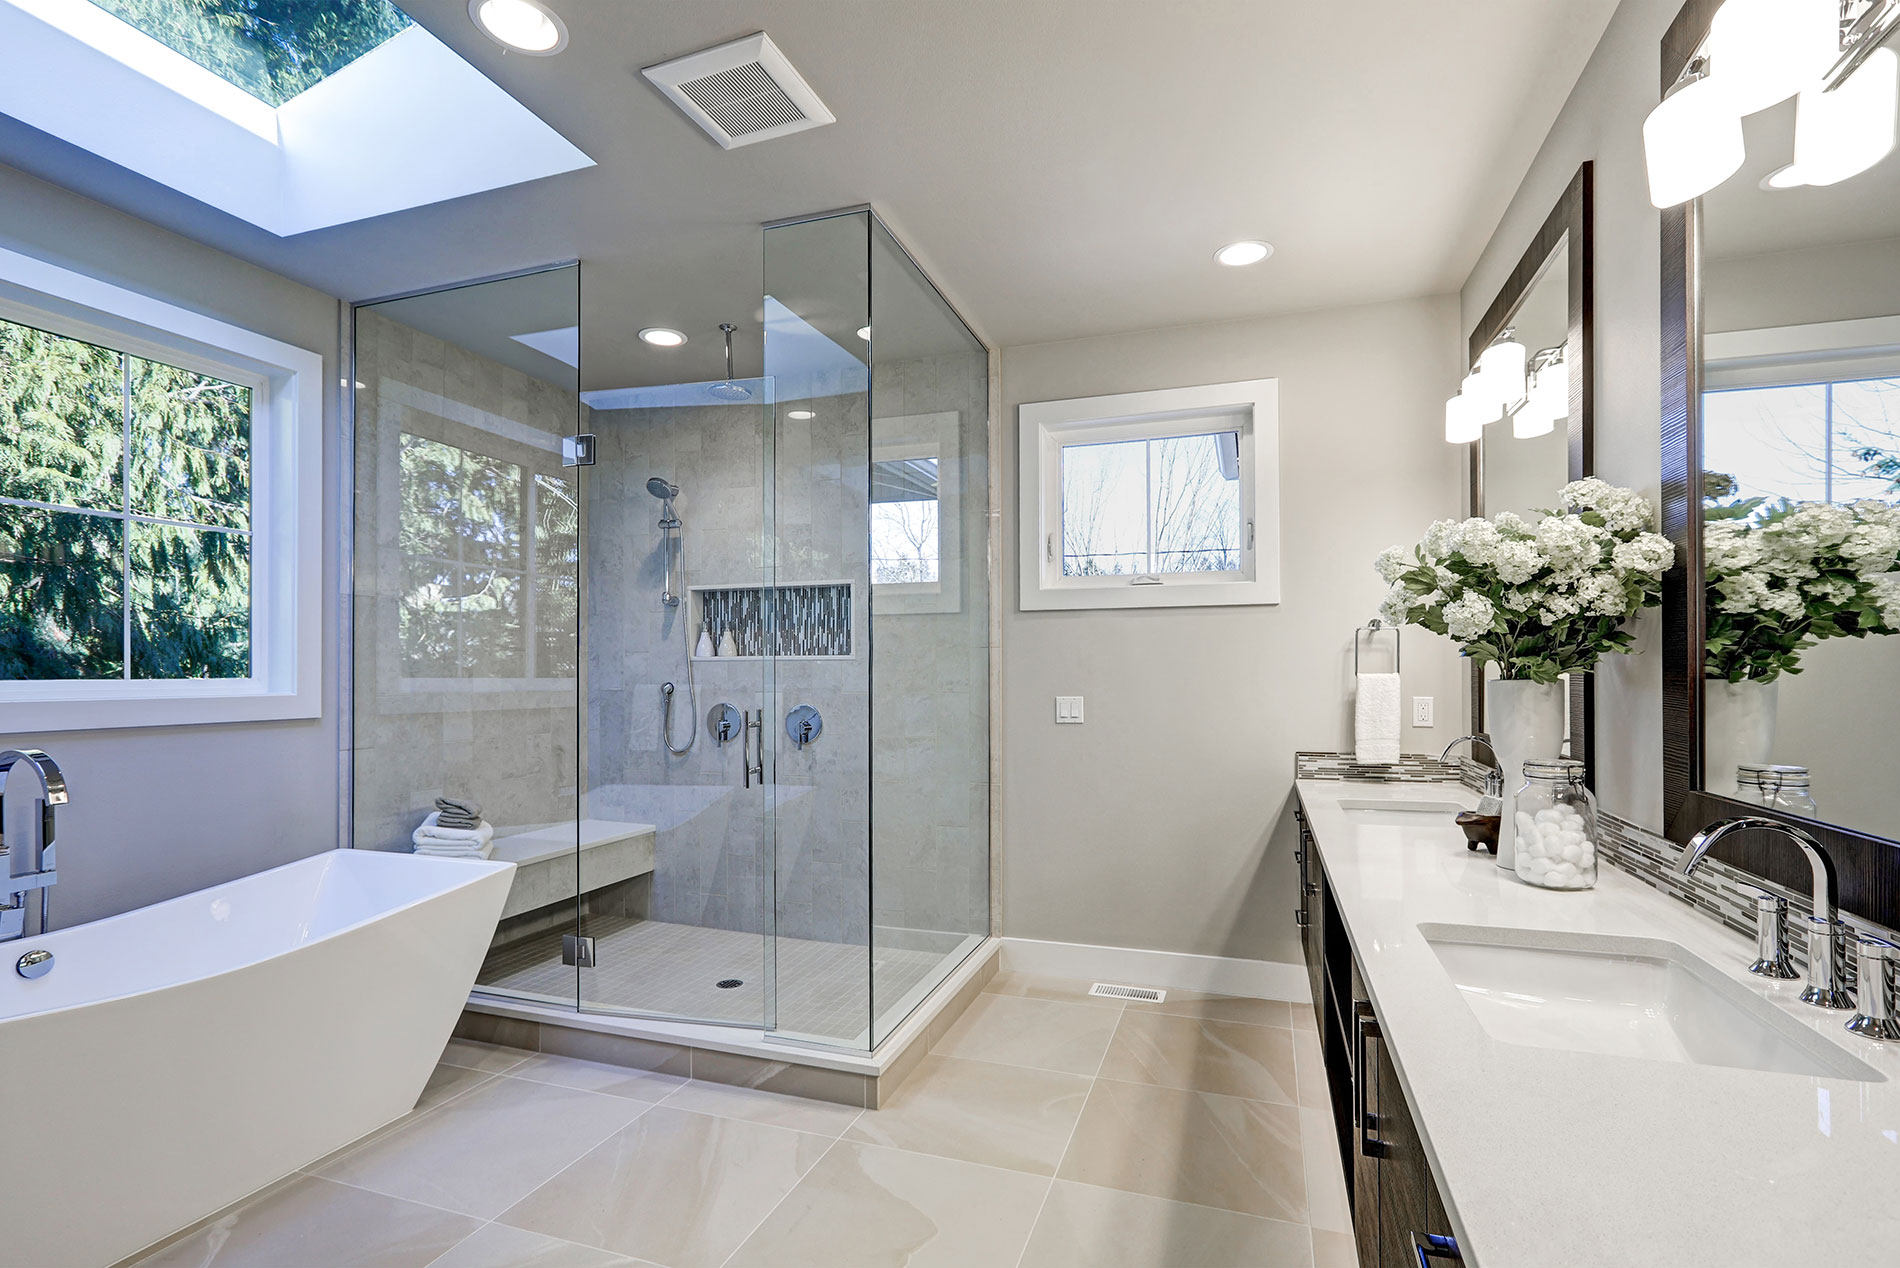 Average Cost Of A Master Bathroom, How Much Does It Cost For A Full Bathroom Renovation